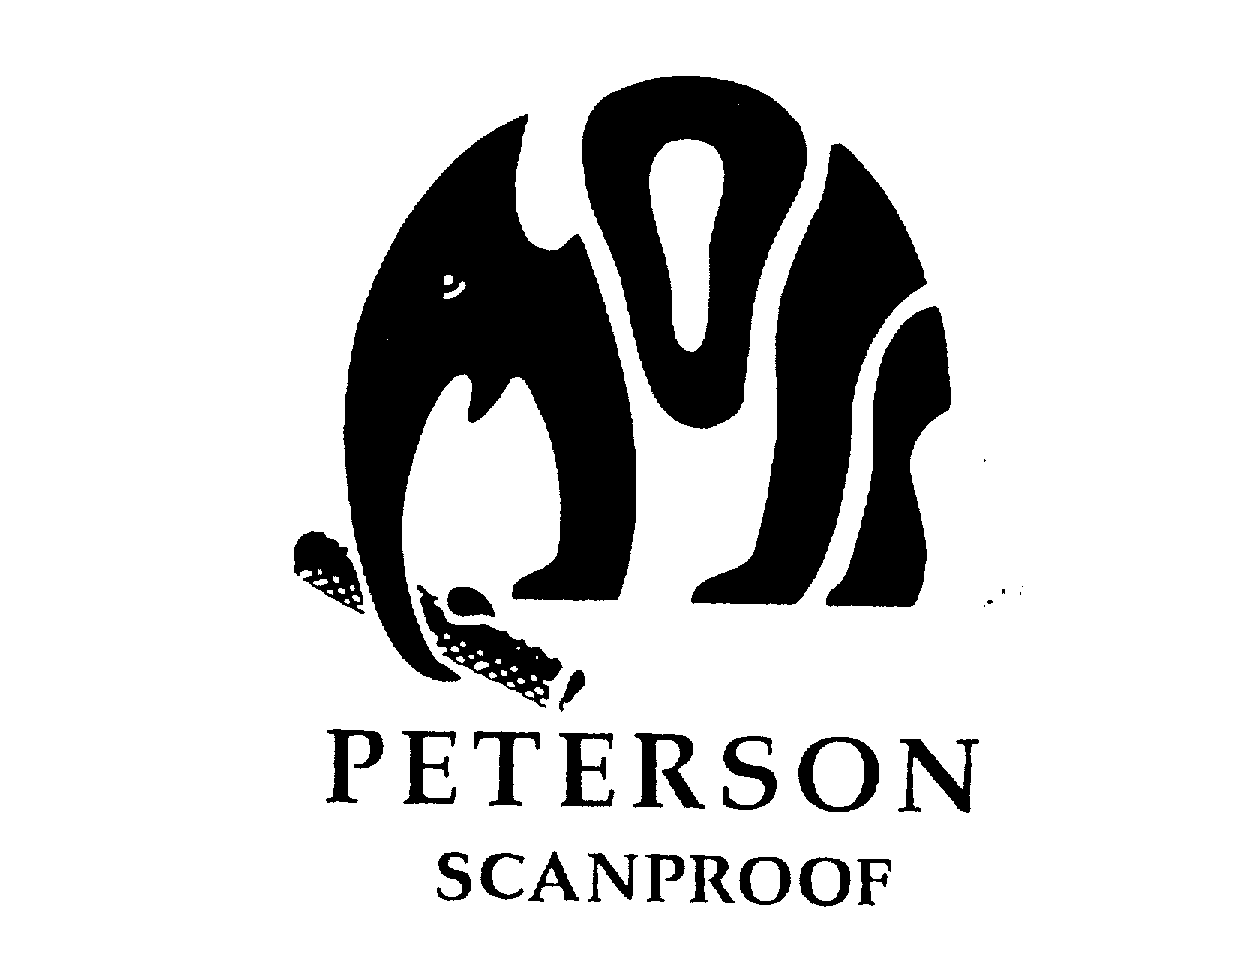  PETERSON SCANPROOF